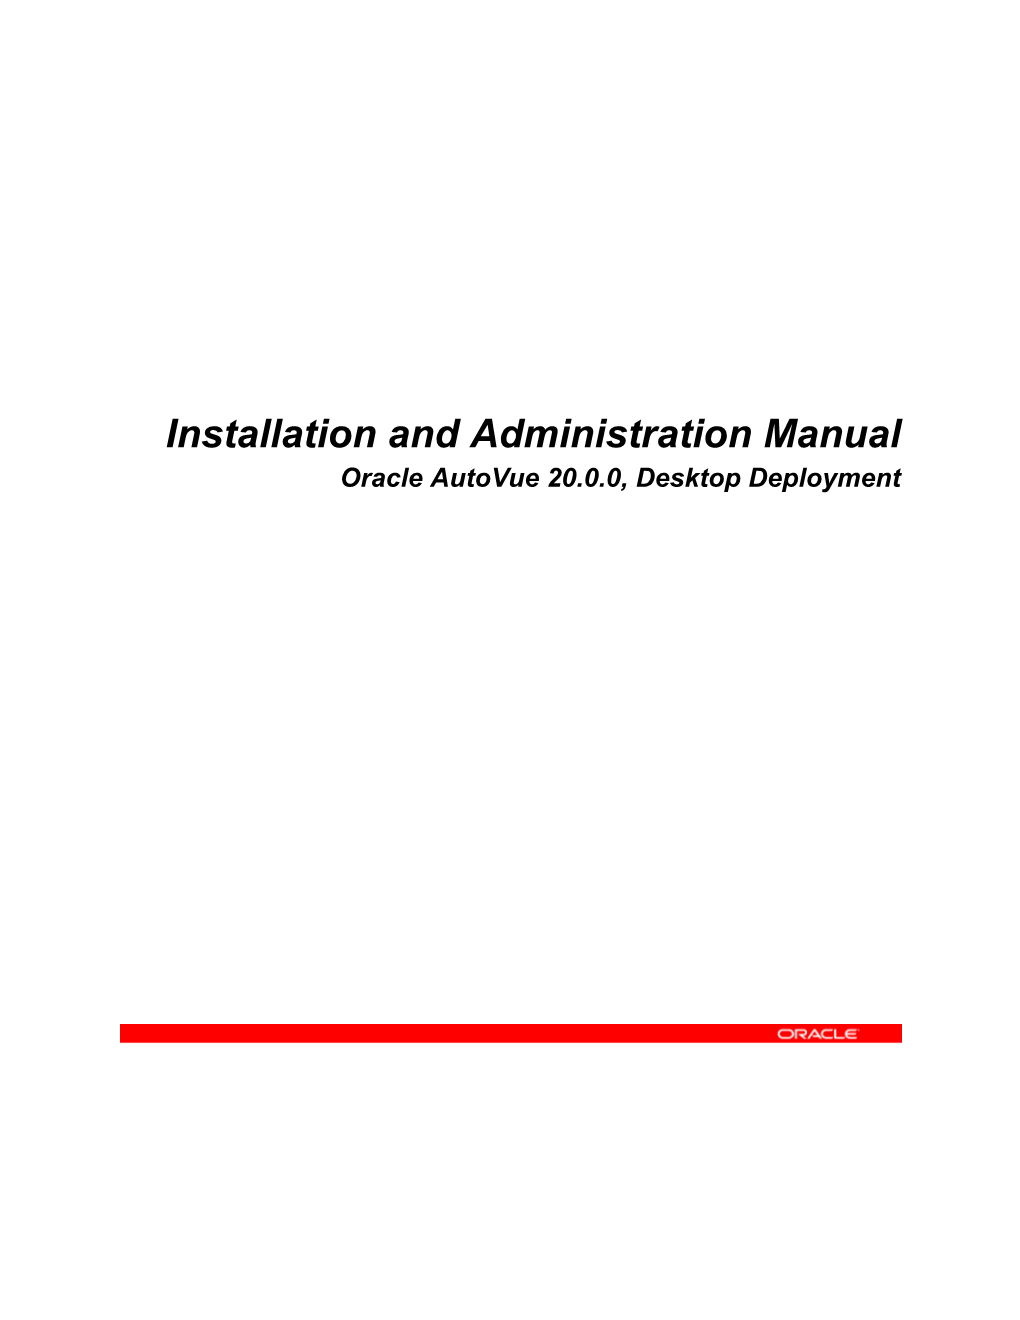 Installation and Administration Manual Oracle Autovue 20.0.0, Desktop Deployment Copyright © 1999, 2010, Oracle And/Or Its Affiliates